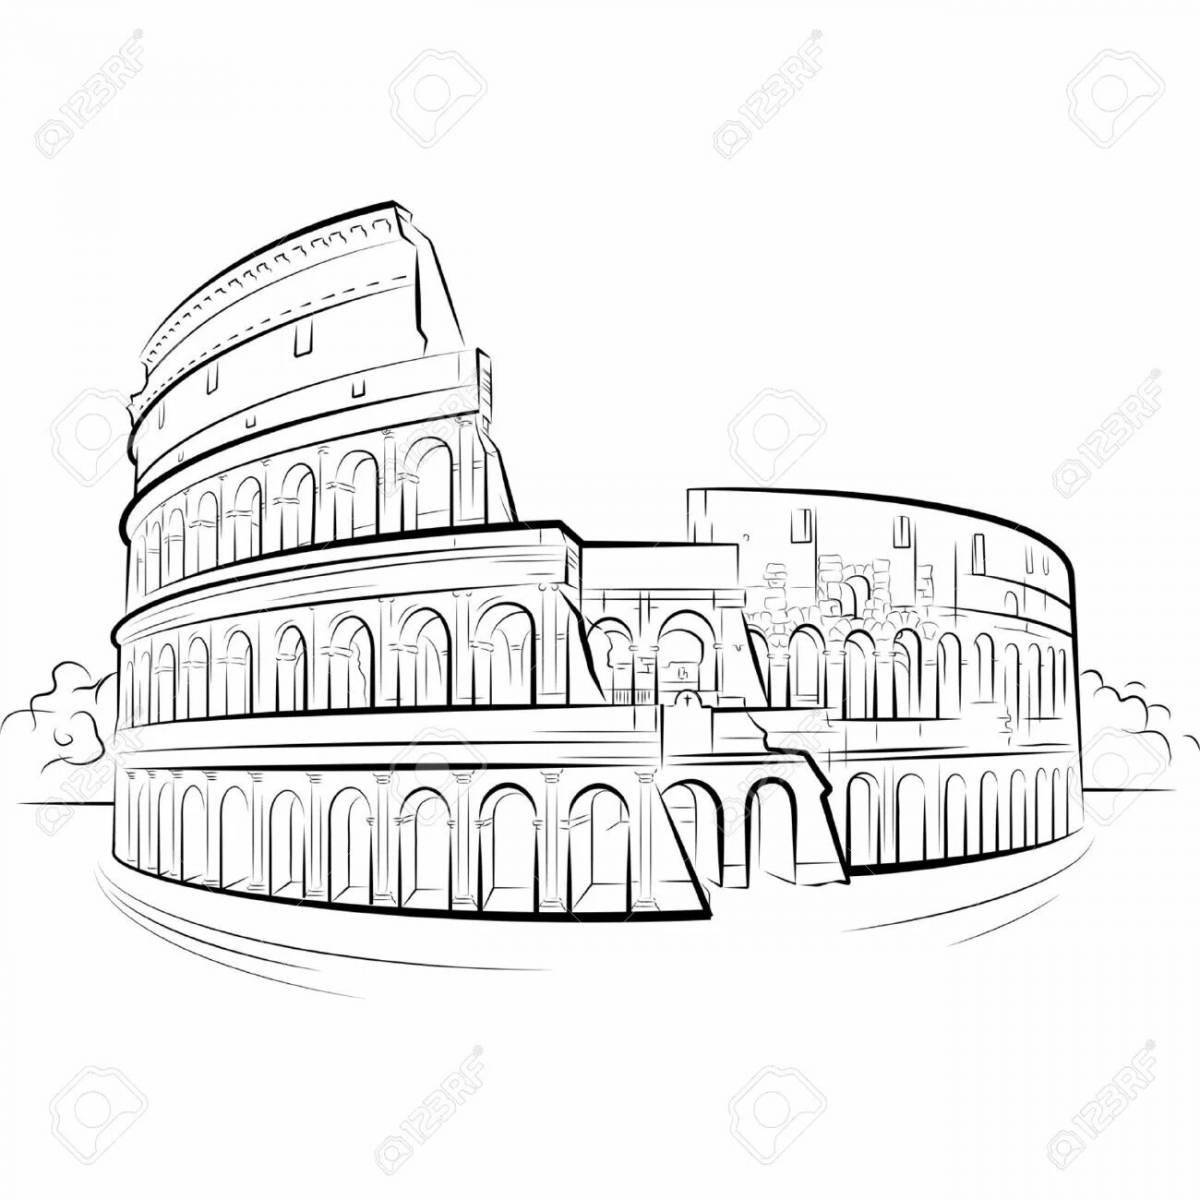 Glorious colosseum coloring pages for kids